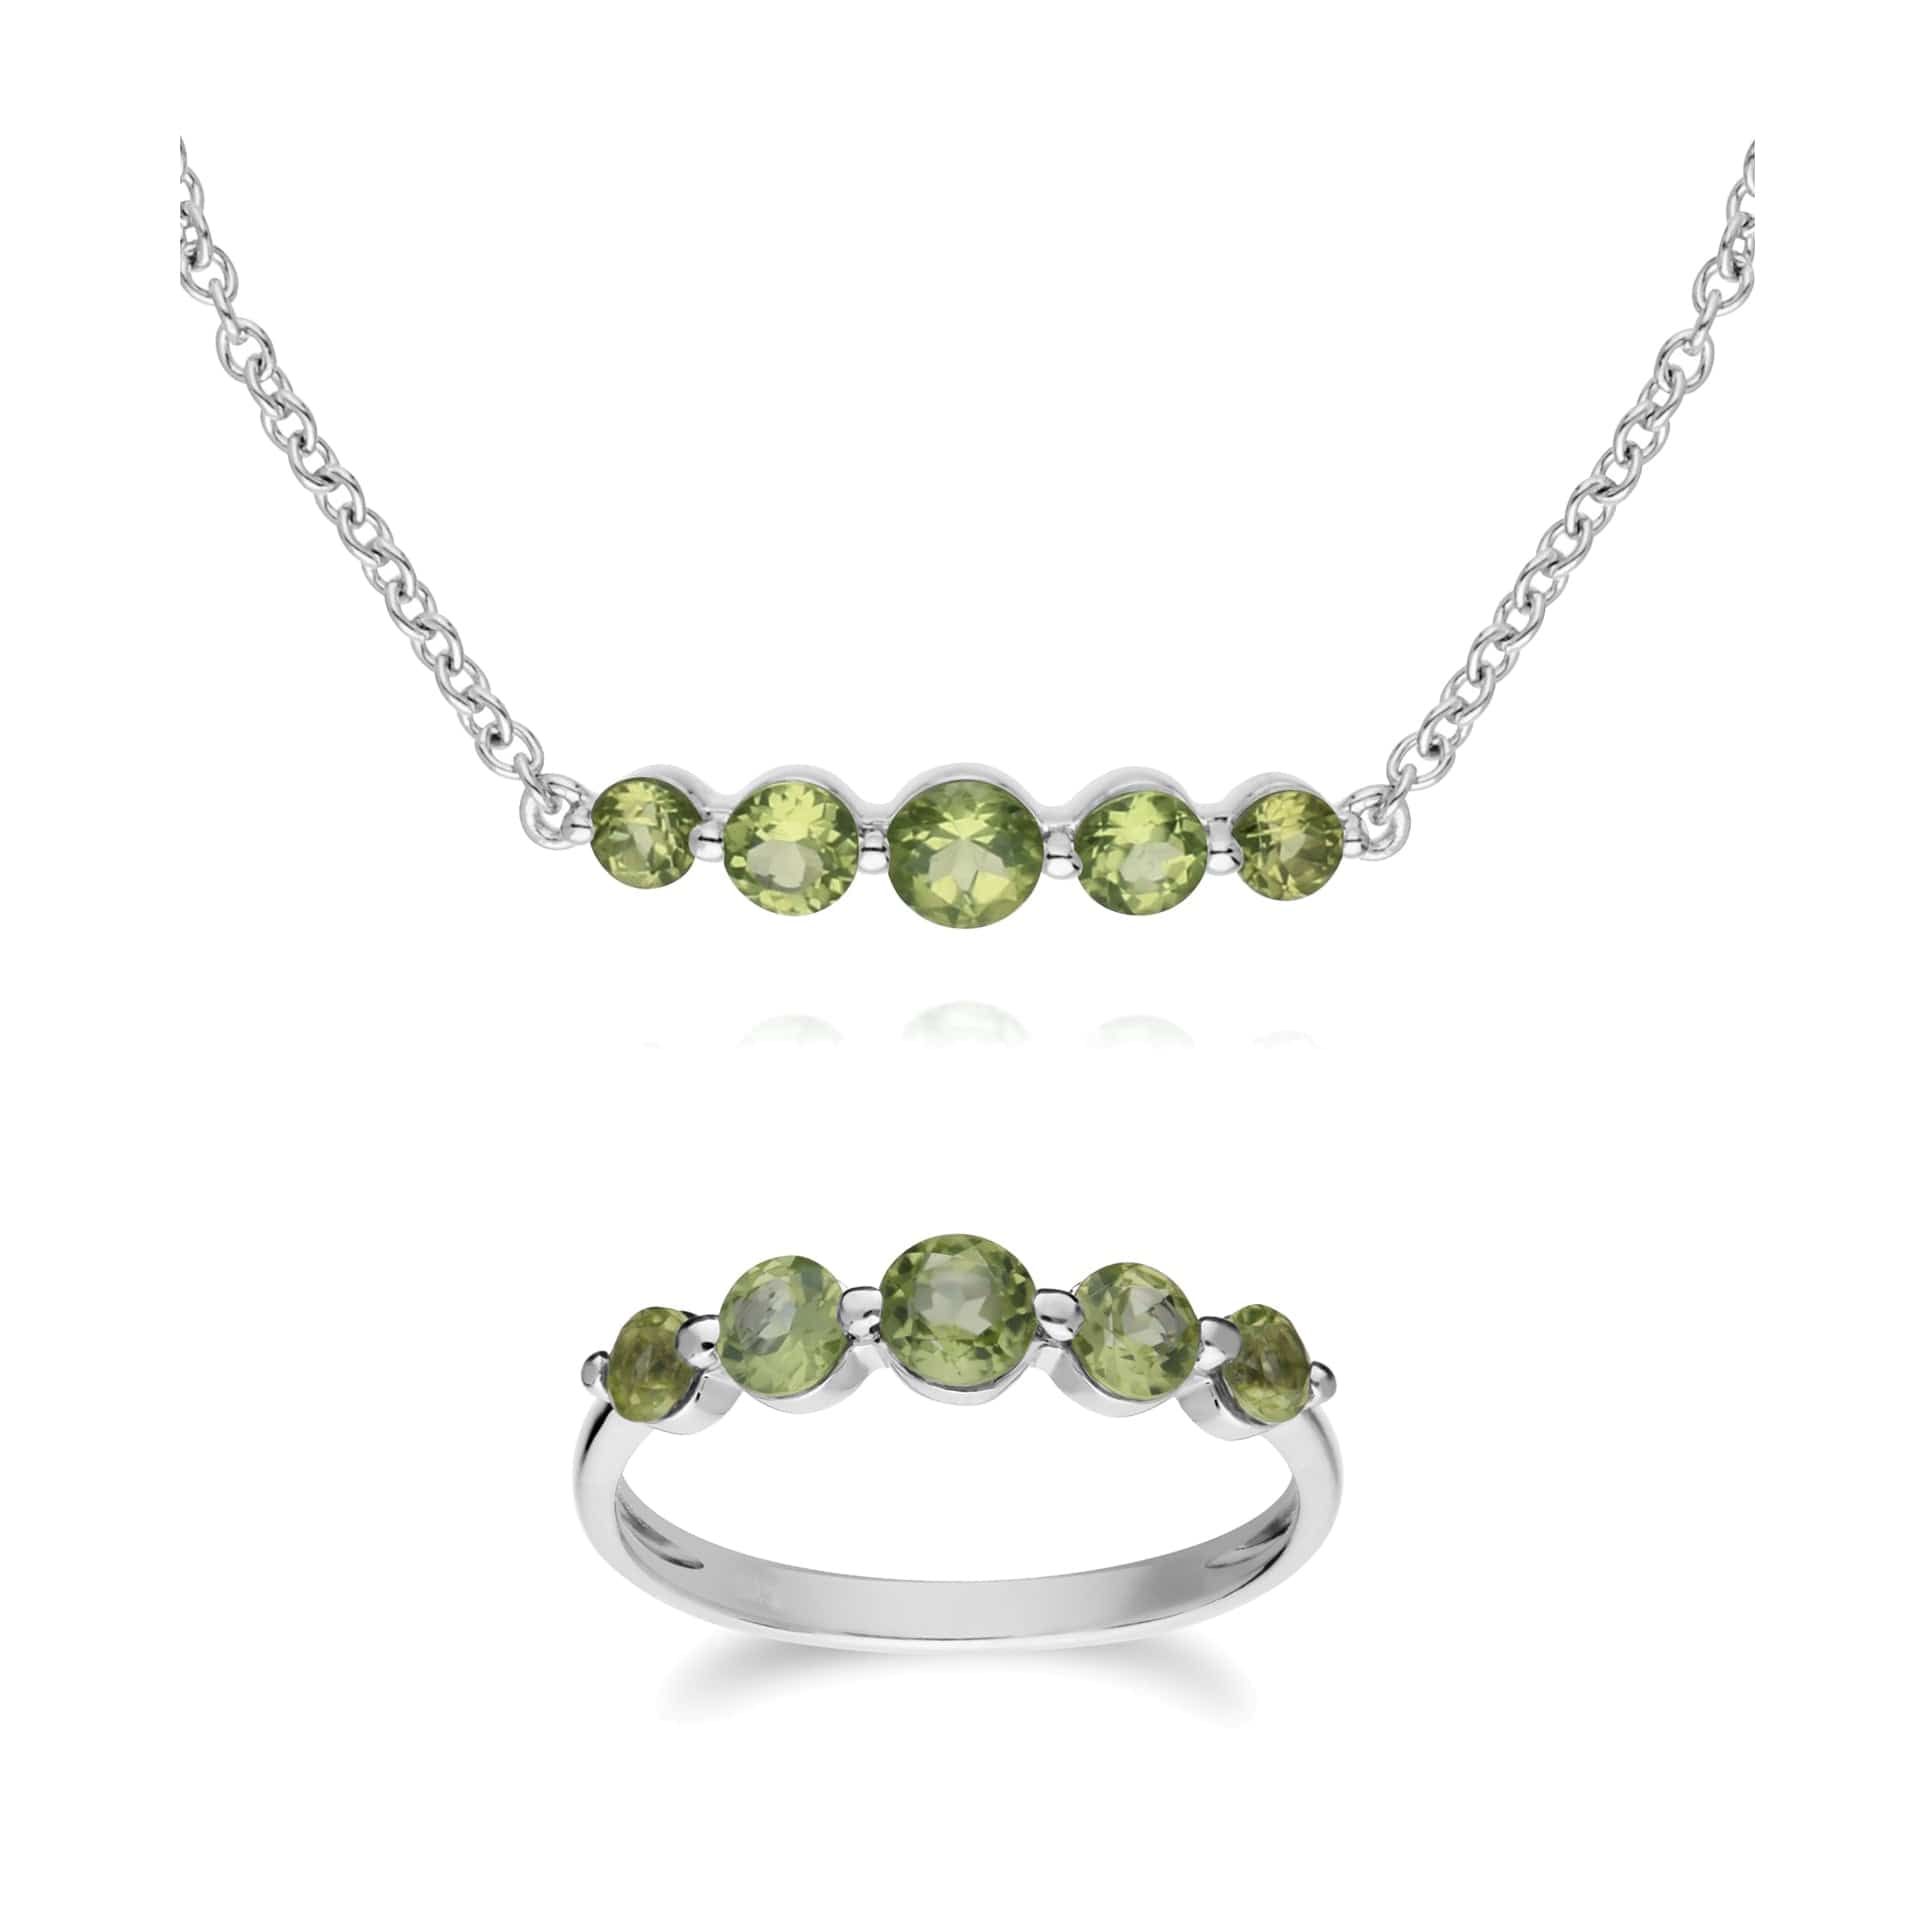 270L011004925-270R055904925 Classic Round Peridot Five Stone Bracelet &  Ring Set in 925 Sterling Silver 1